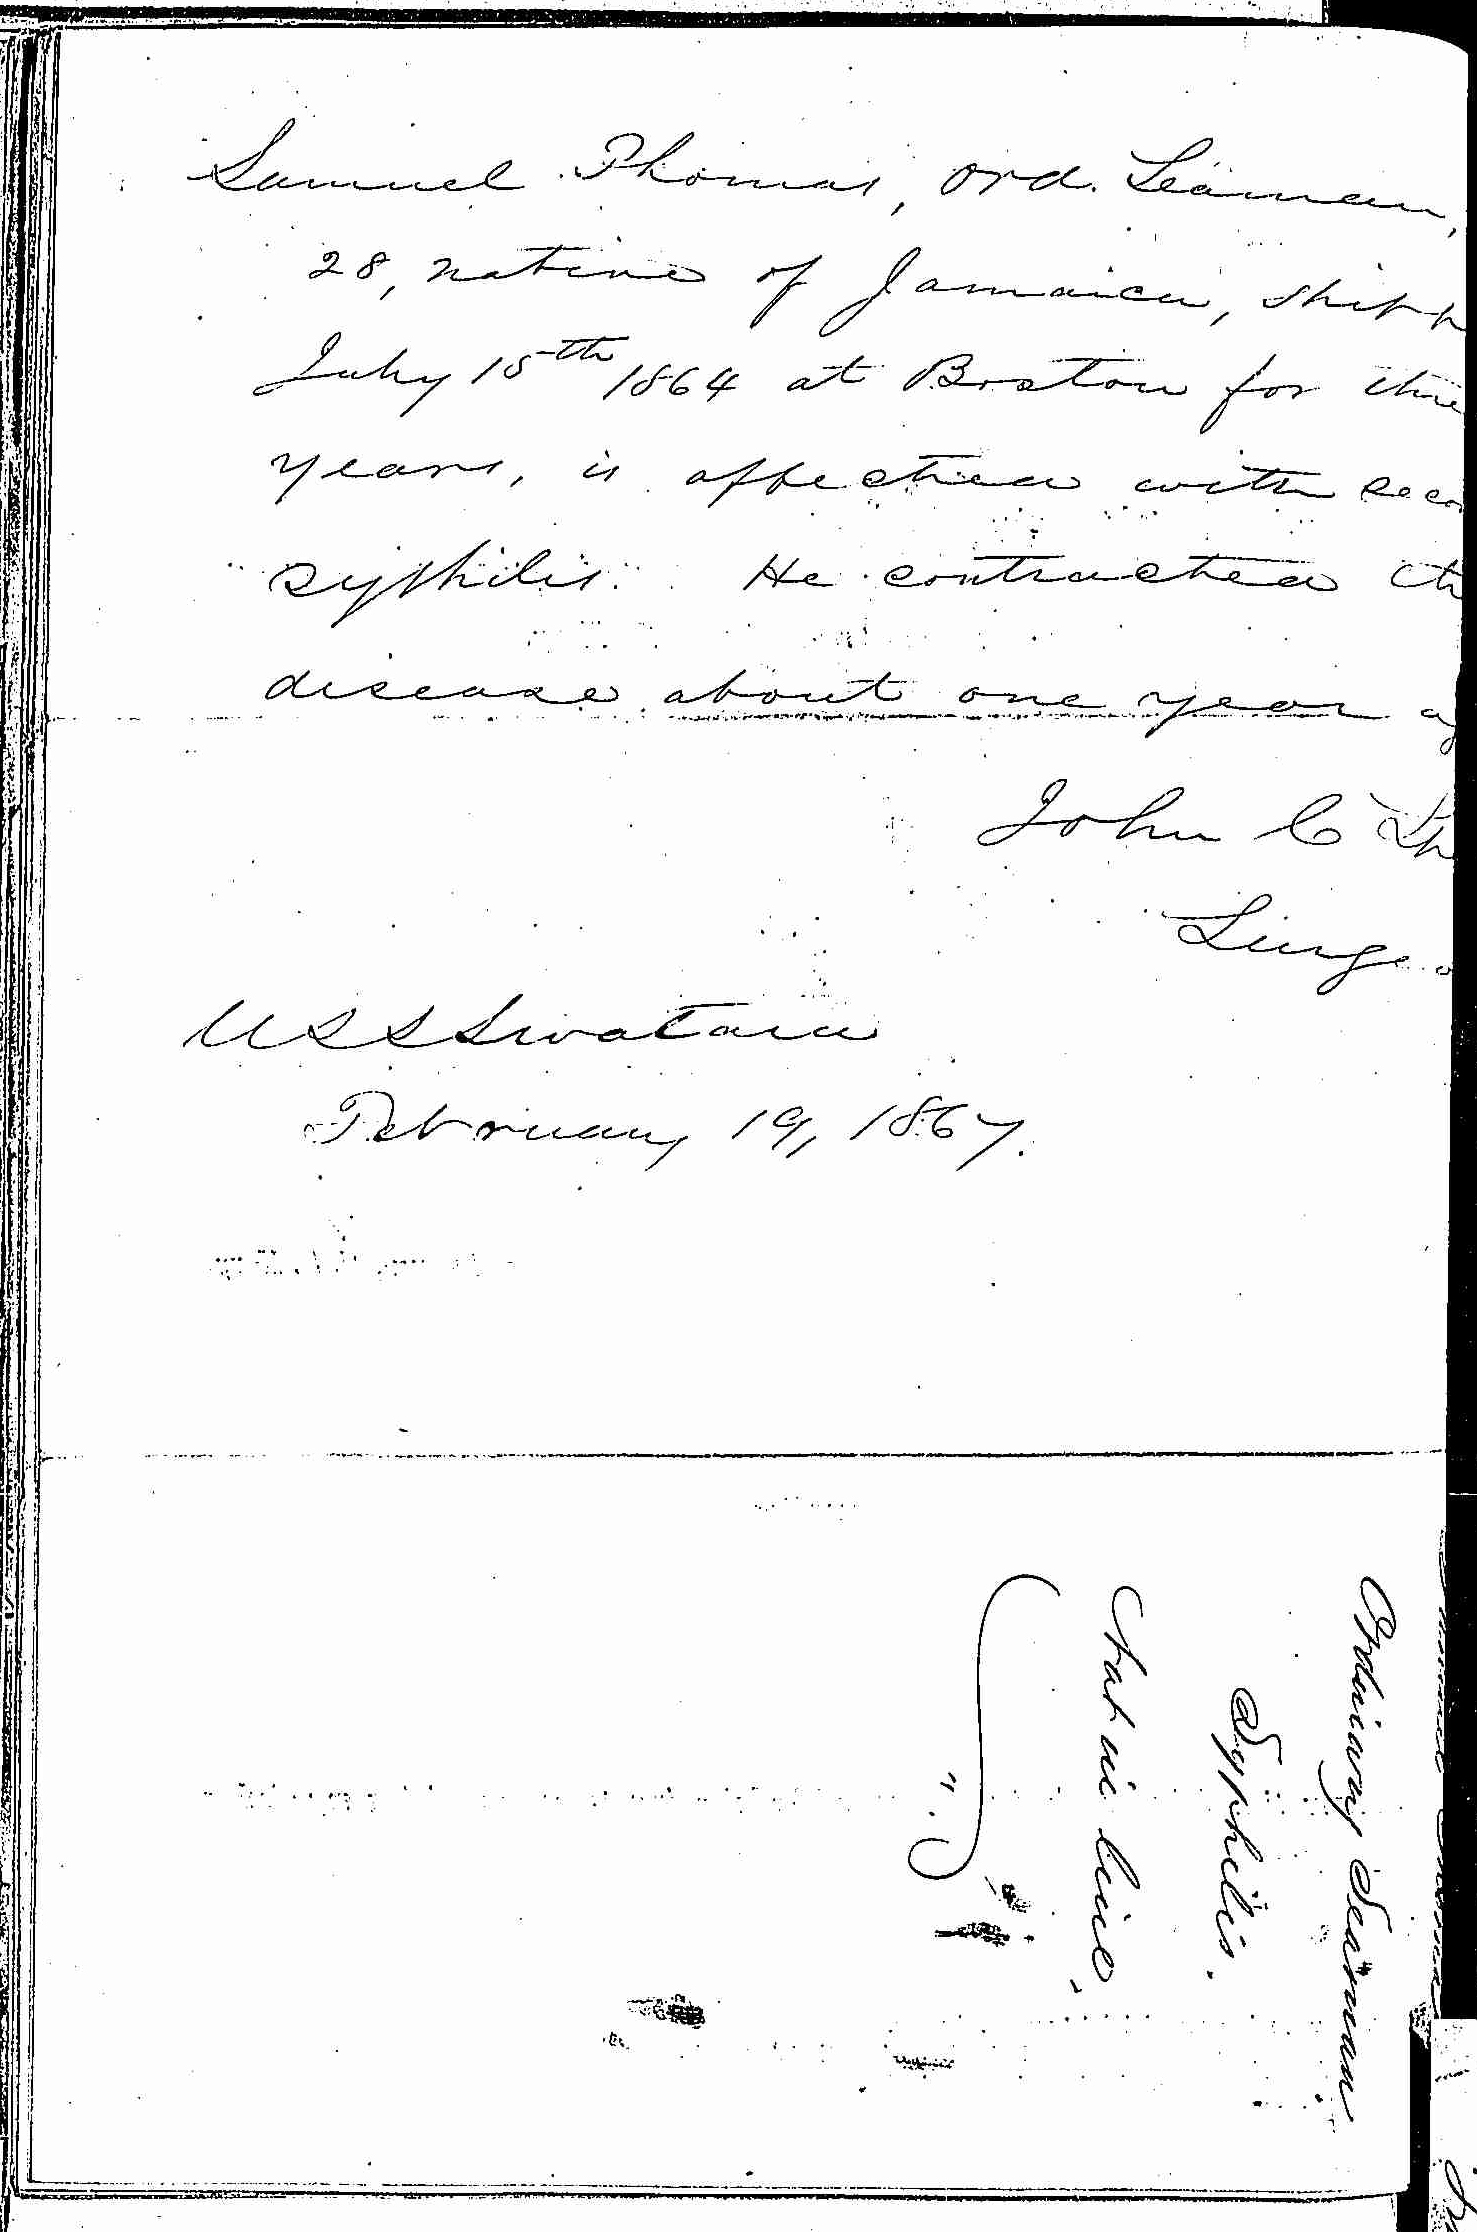 Entry for Samuel Thomas (page 2 of 2) in the log Hospital Tickets and Case Papers - Naval Hospital - Washington, D.C. - 1866-68